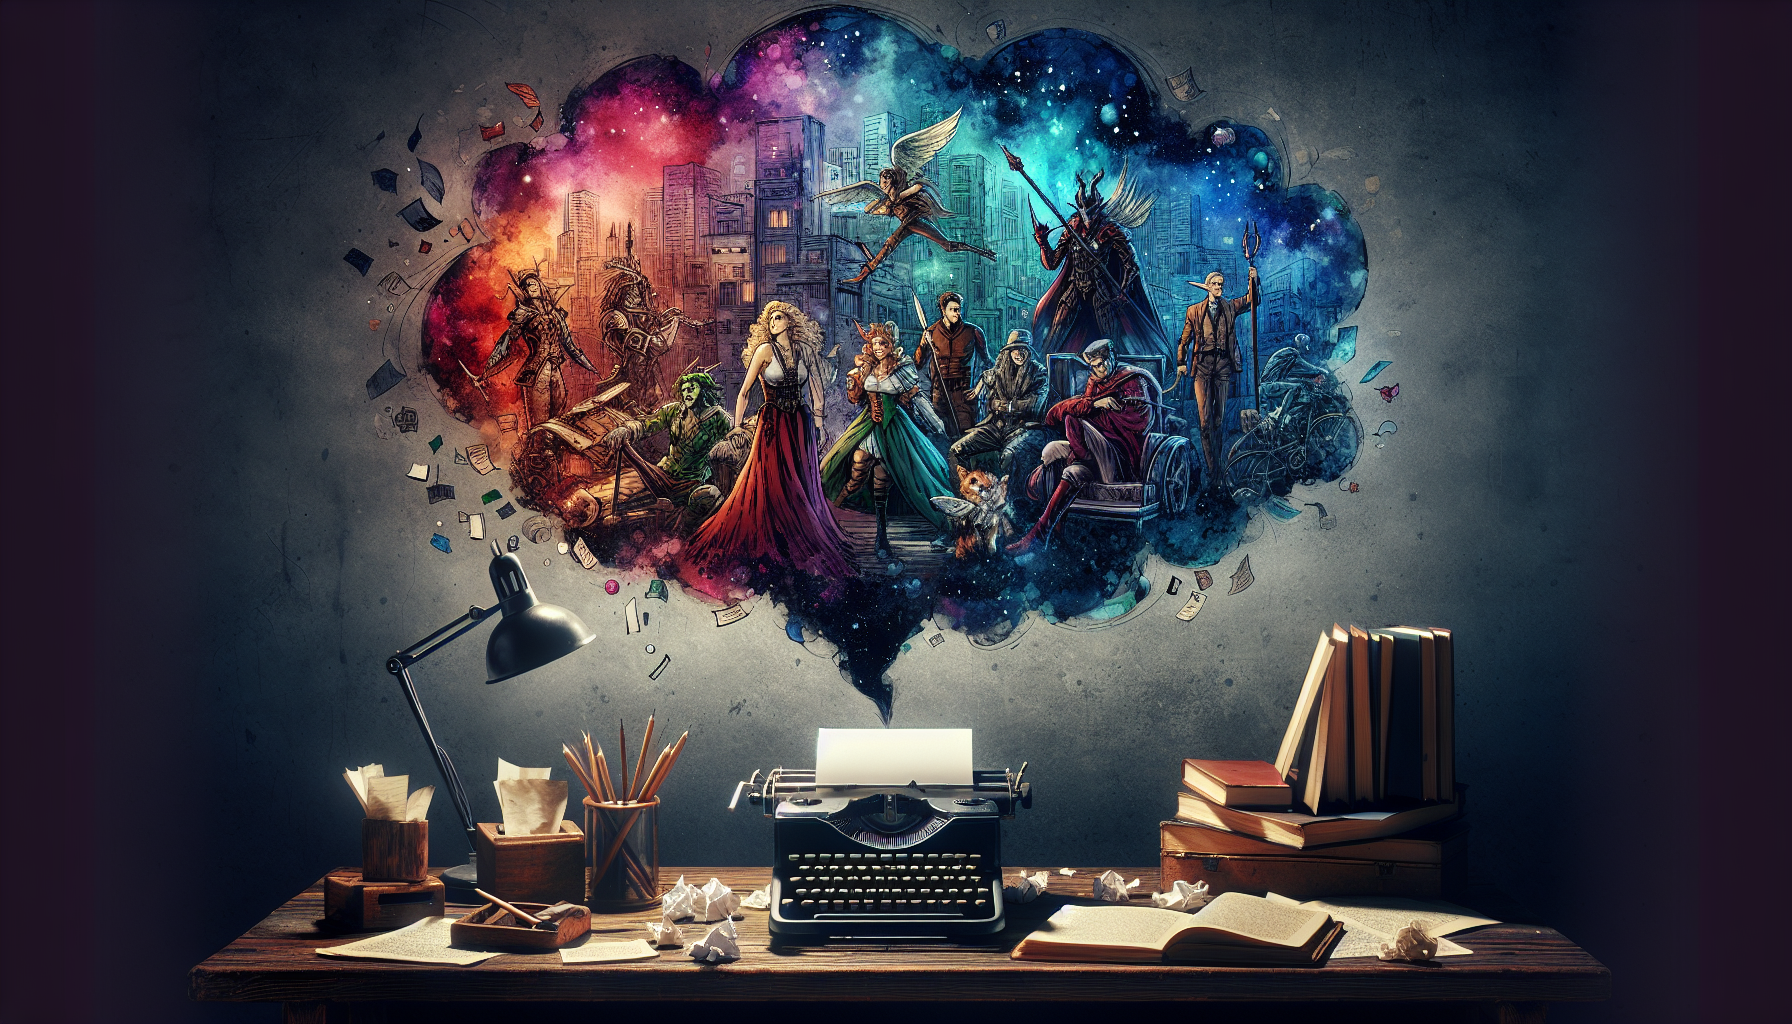 An imaginative writer's desk at twilight, scattered with notes and an old typewriter, while a visible thought bubble shows a diverse group of fictional characters from various genres interacting in a